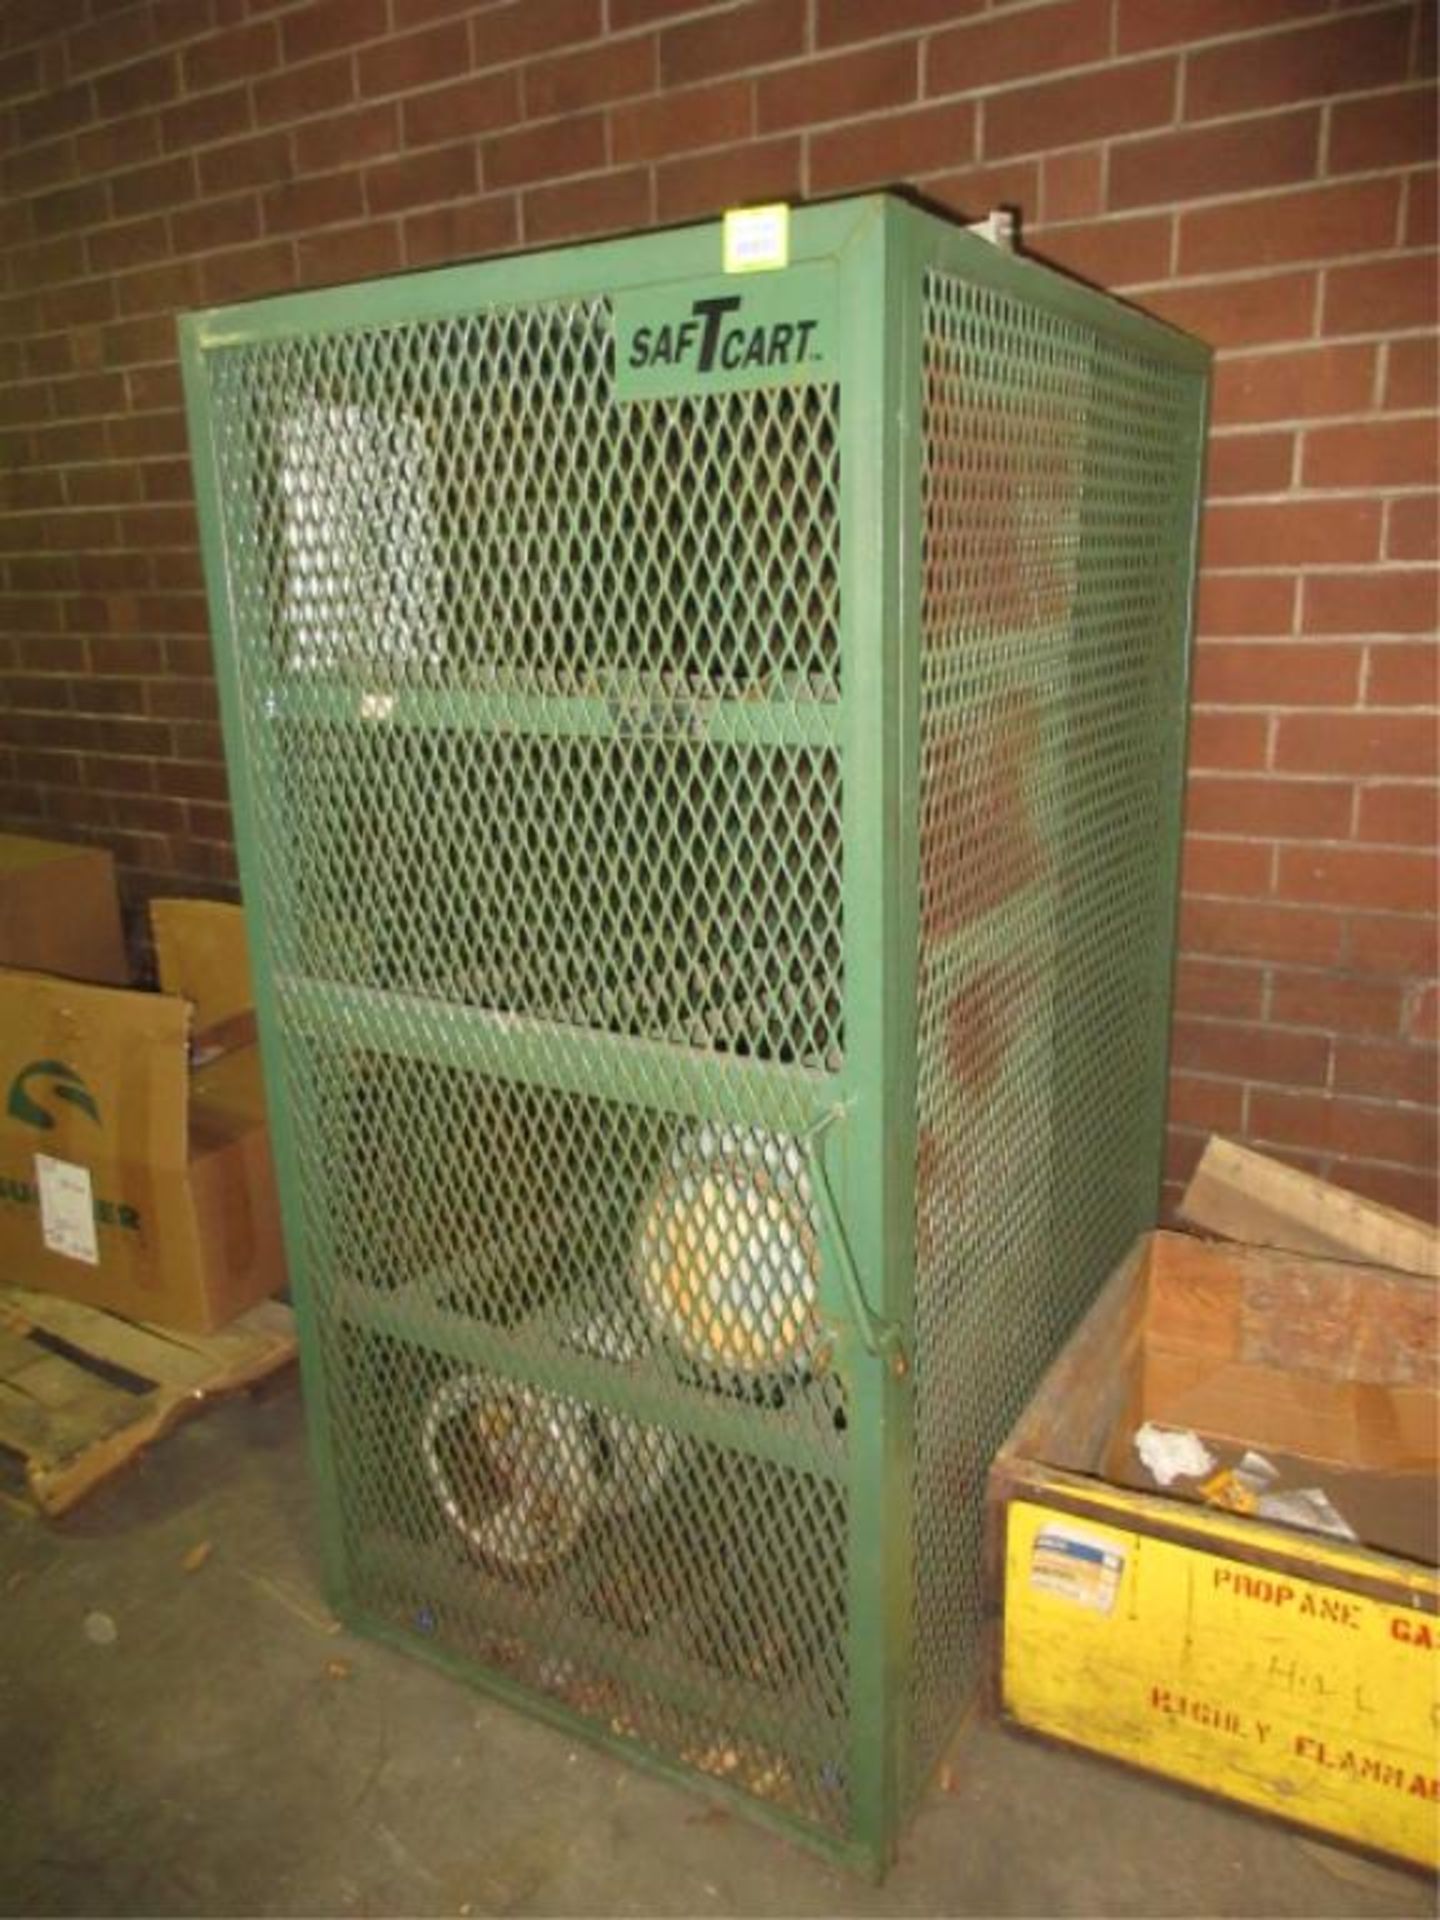 Saf T Cart Propane Safety Storage Rack, tanks not included. HIT# 2179368. whse 3. Asset Located at